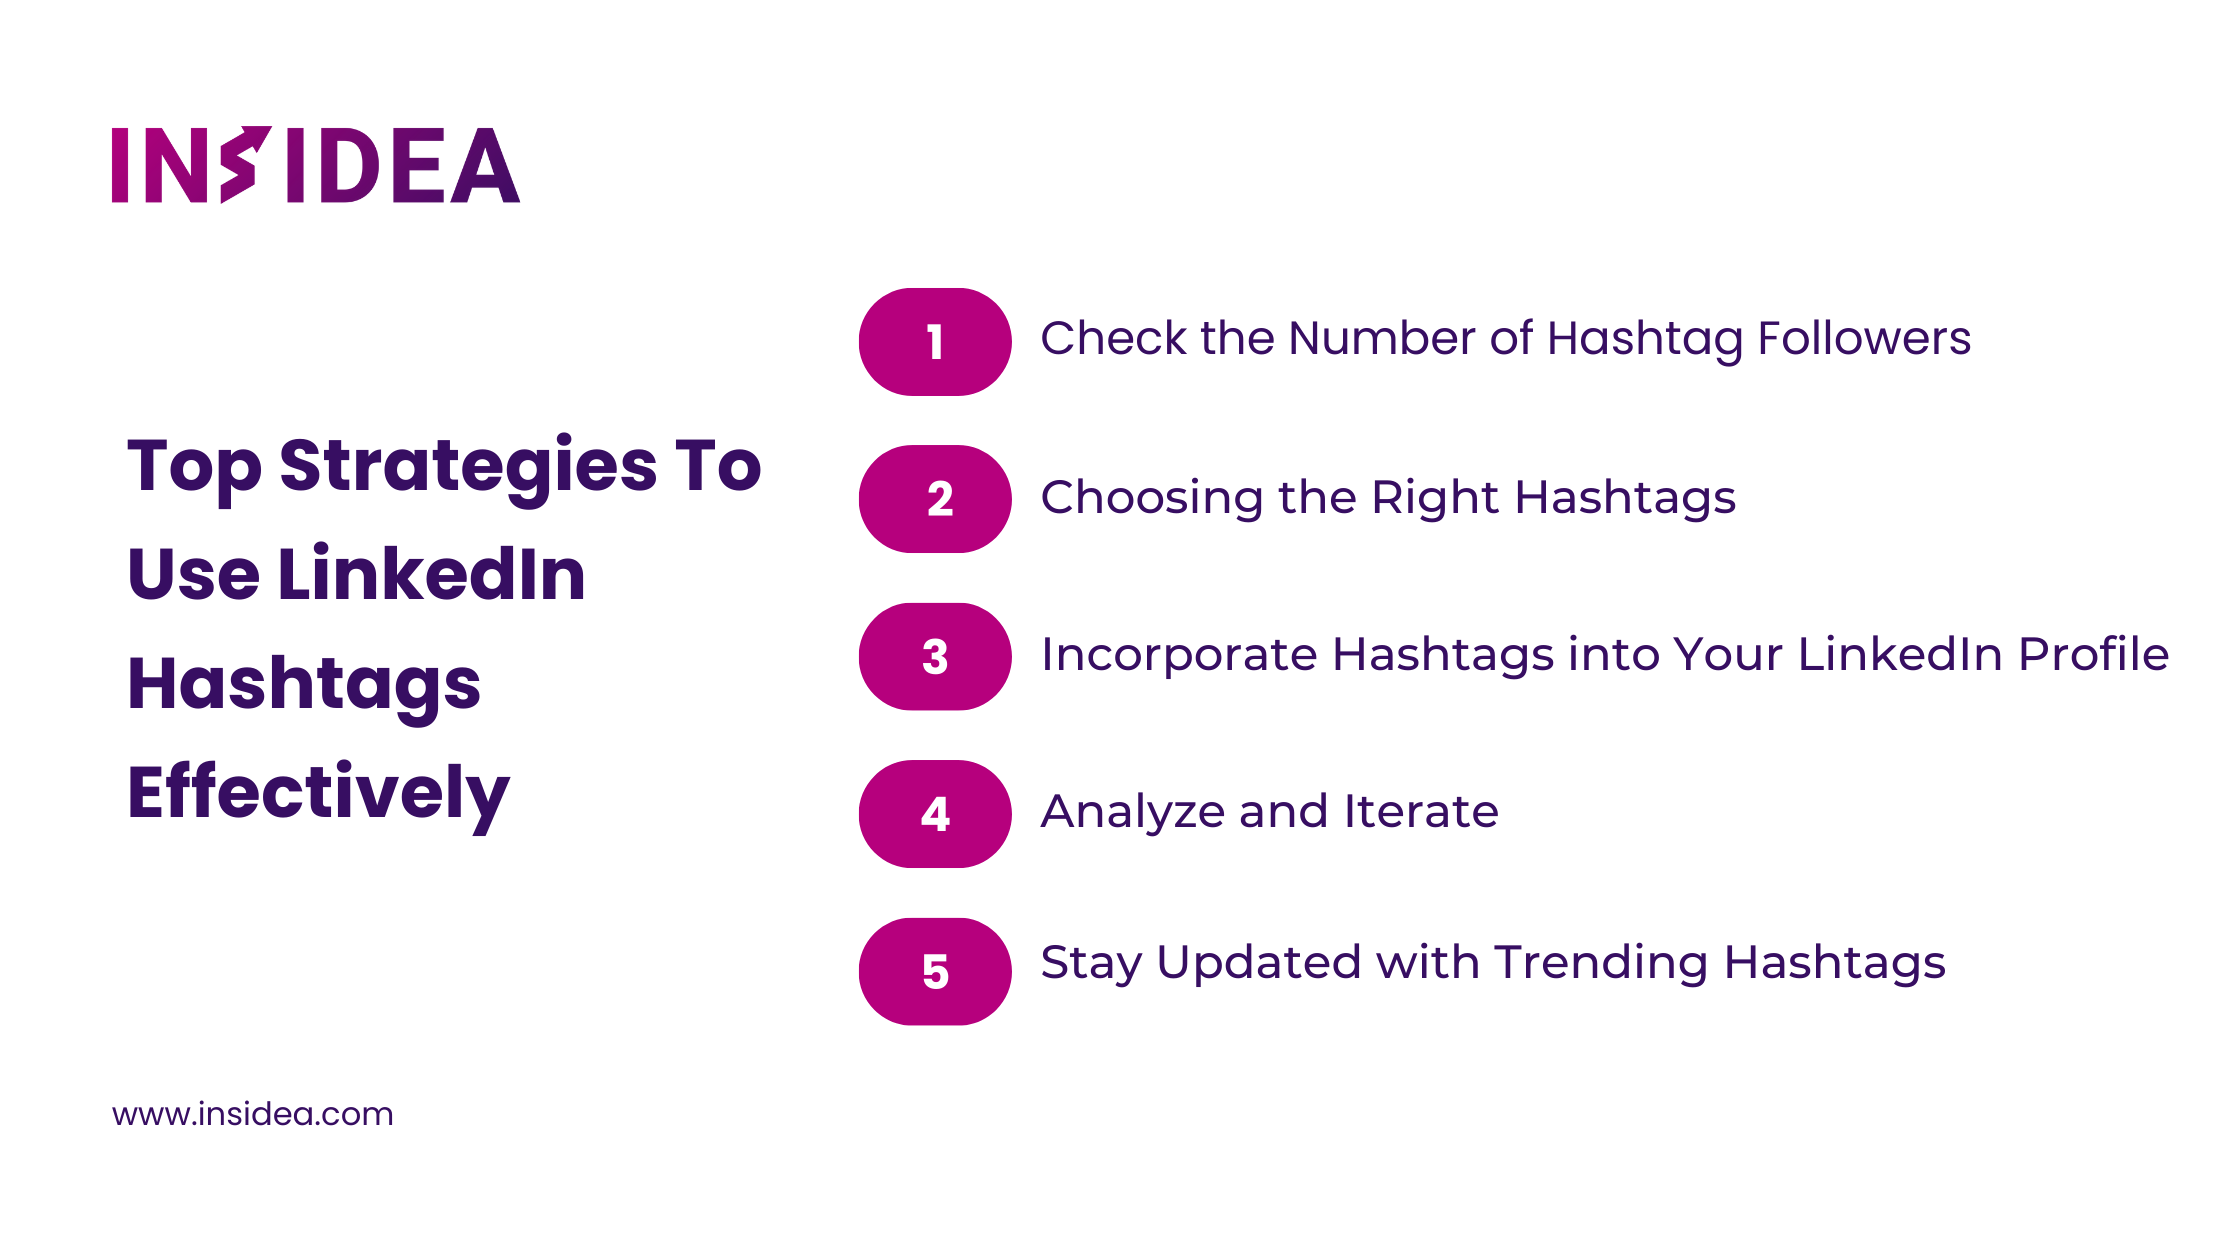 Top Strategies To Use LinkedIn Hashtags Effectively